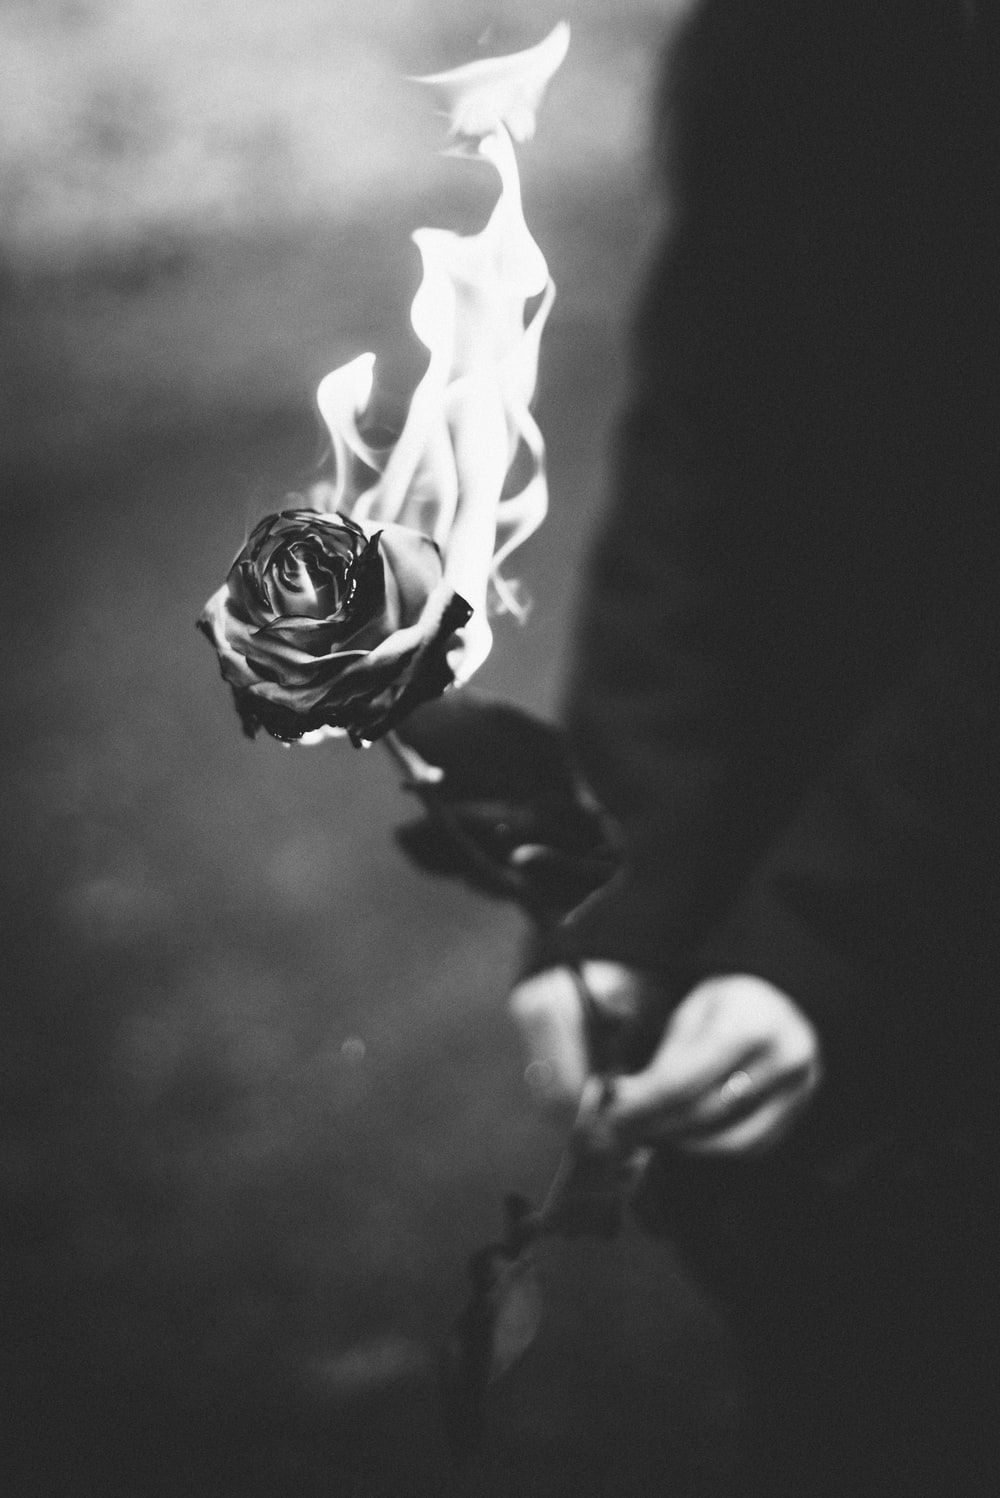 Rose On Fire Picture. Download Free Image